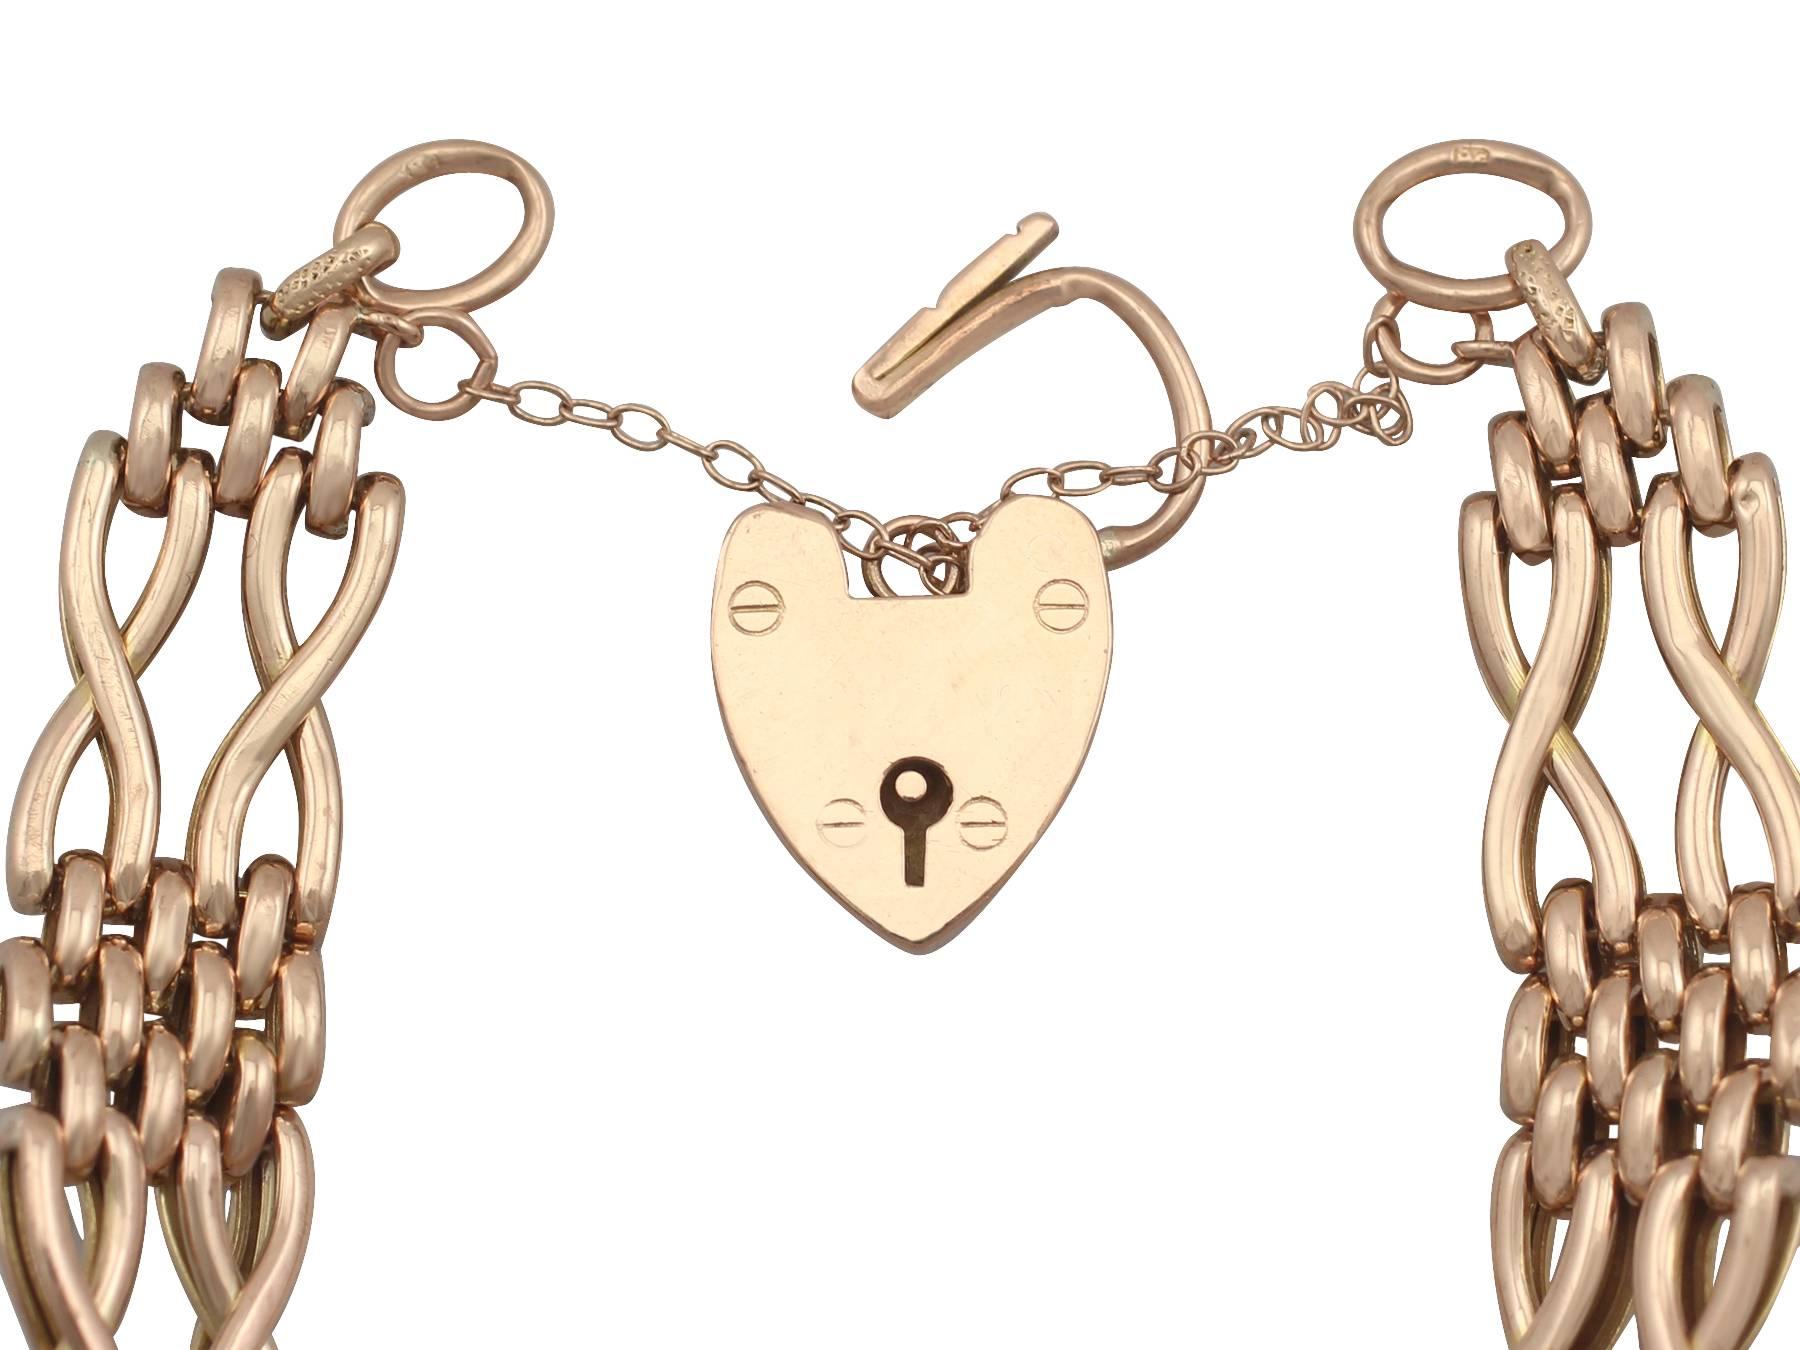 A fine and impressive antique 9 karat rose gold gate style bracelet with a heart shaped padlock clasp; part of our diverse Victorian jewelry collections

This fine and impressive antique gate bracelet has been crafted in 9 k rose gold.

The bracelet